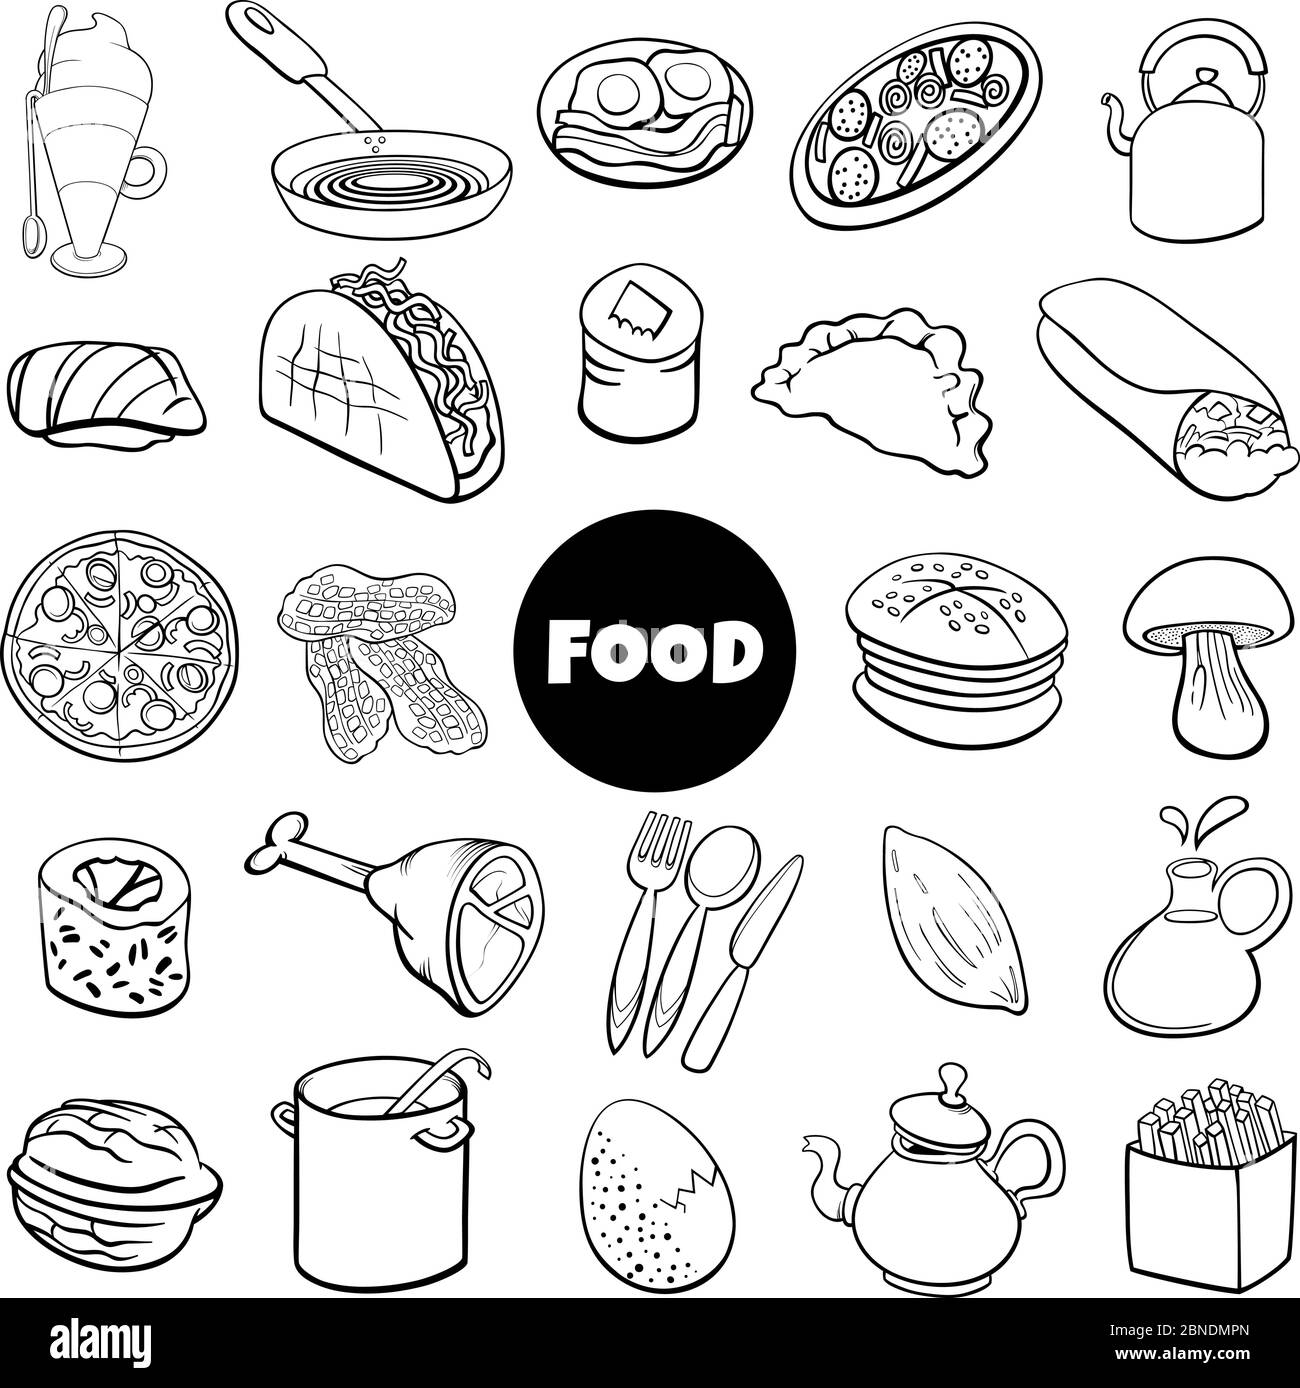 Black and White Cartoon Illustration of Food Objects Big Set Stock Vector